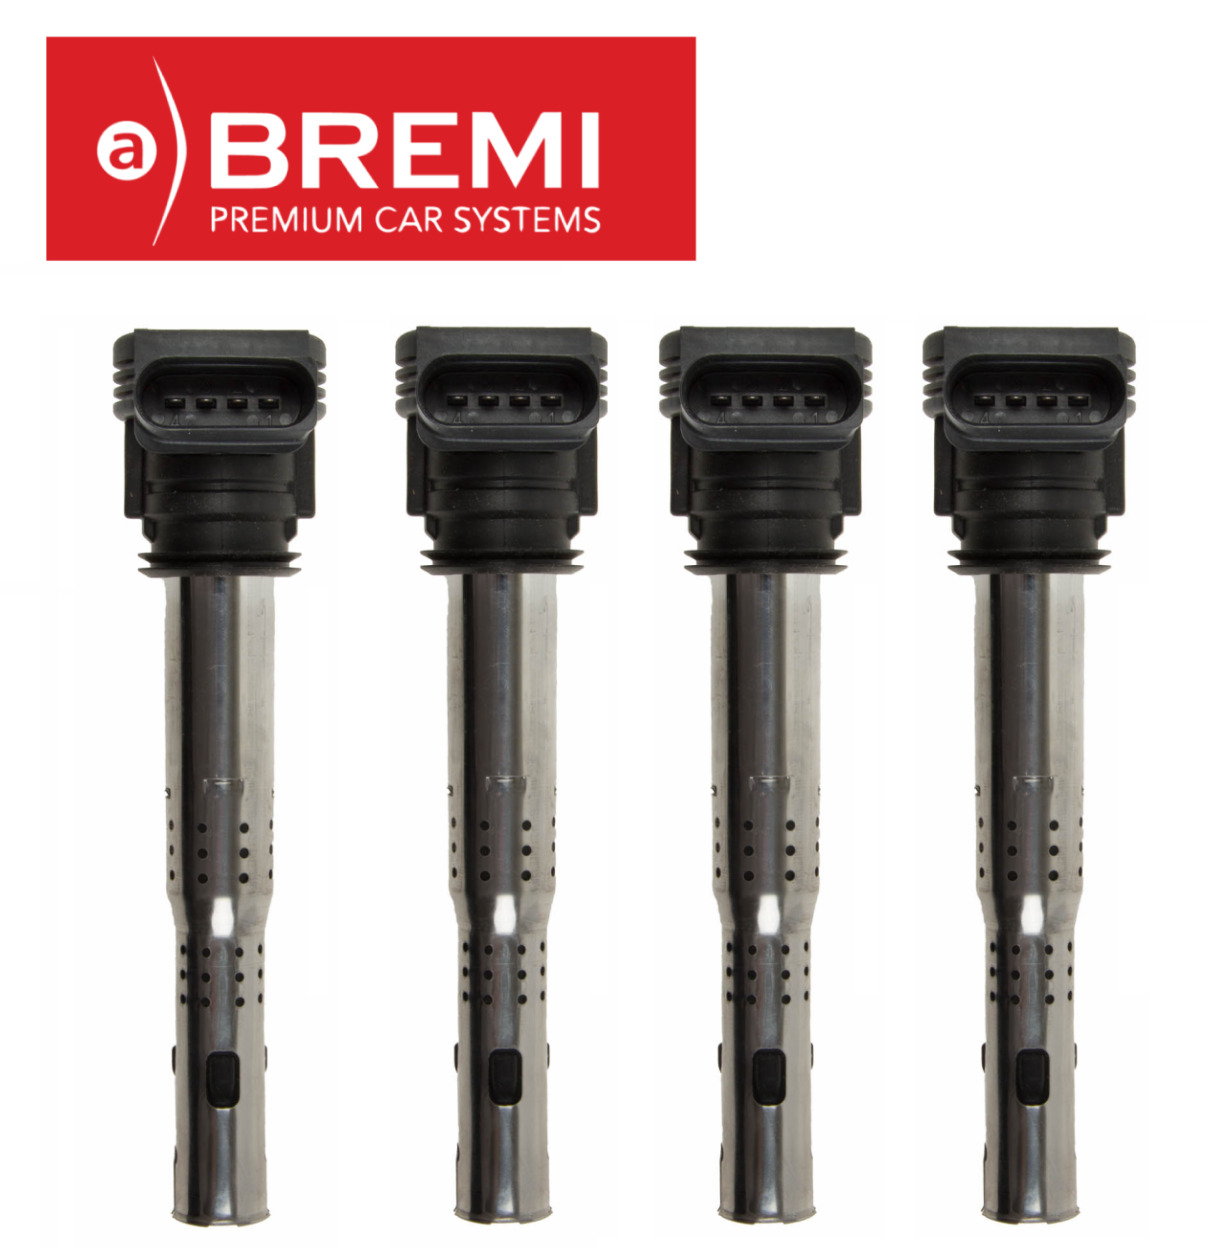 Ignition Coil 4pcs OEM Bremi for Audi A3 A4 A5 A6 Q5 R8 RS4 RS5 TT allroad